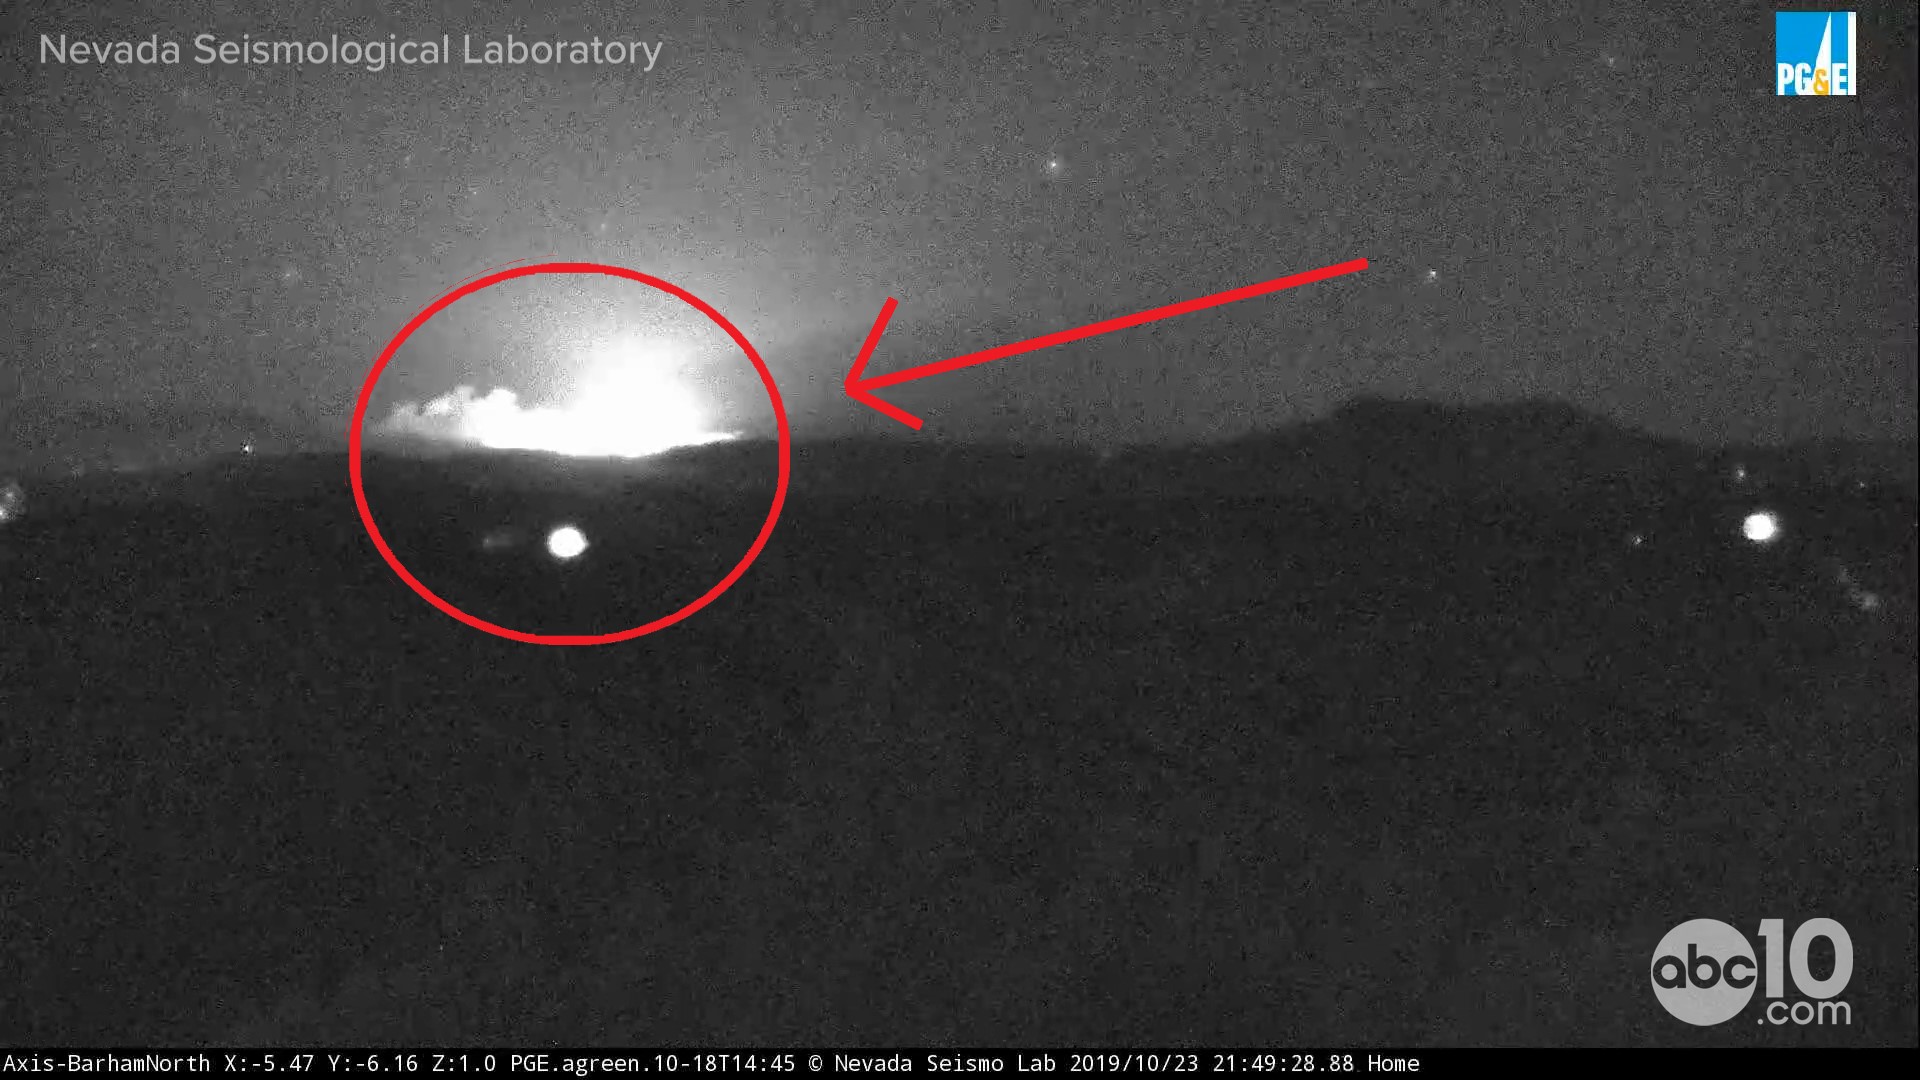 The start of the Kincade Fire in Sonoma County was captured on cameras operated by the Nevada Seismological Laboratory located at the University of Nevada, Reno.